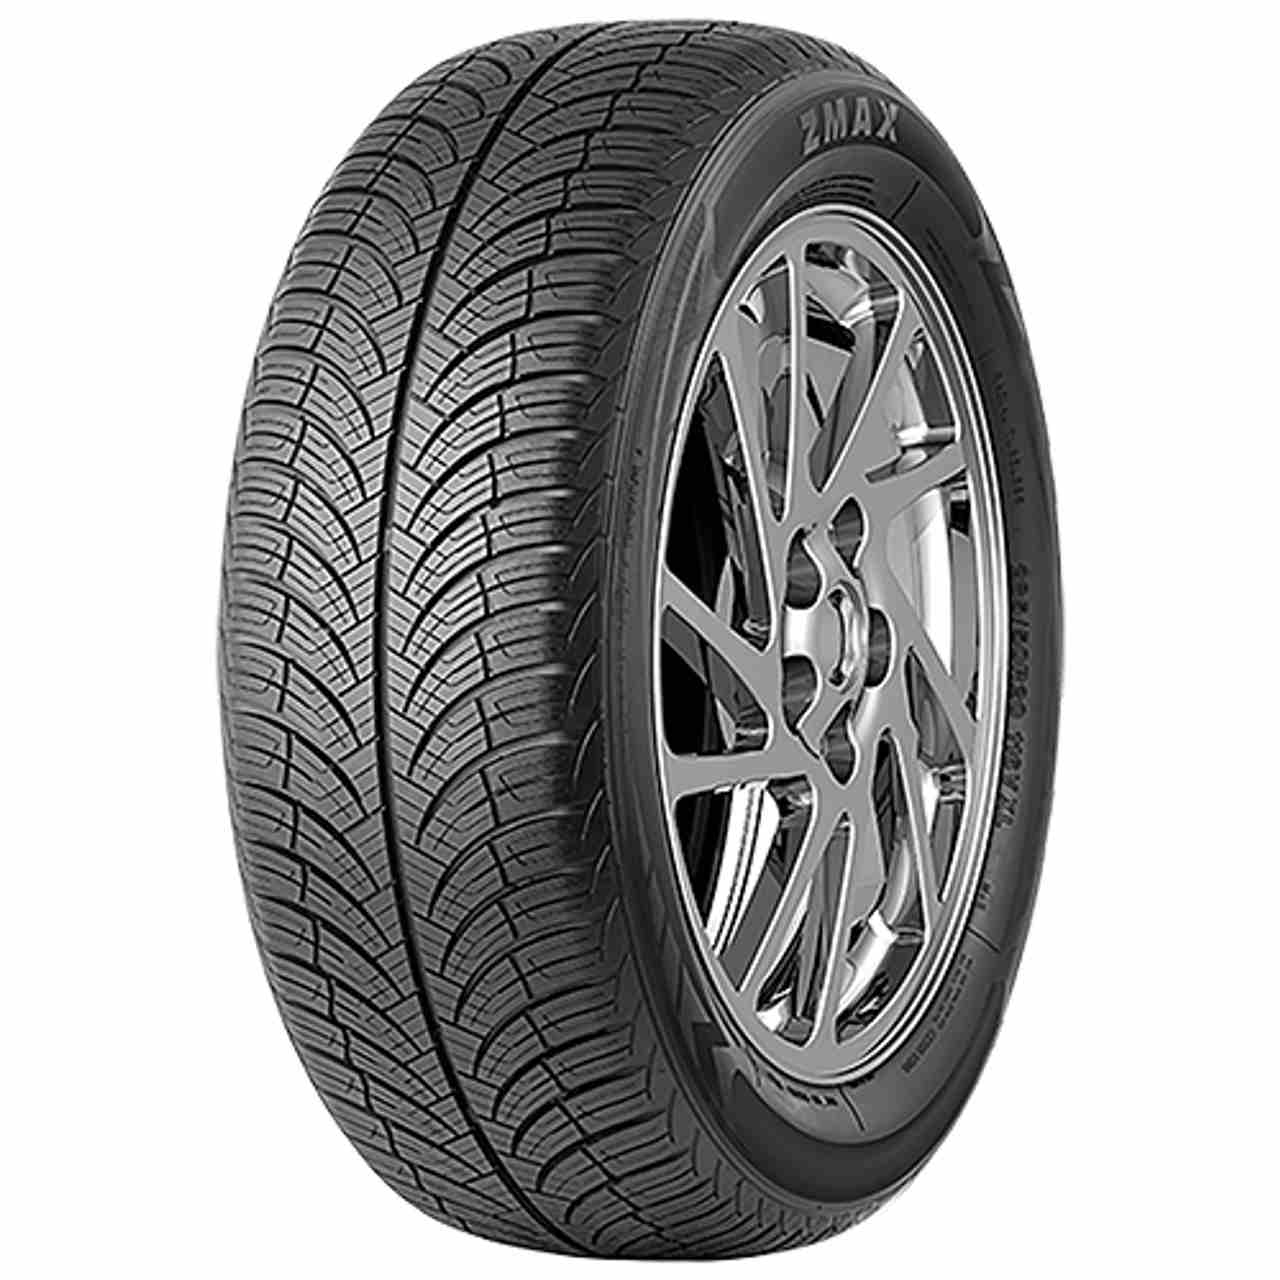 ZMAX X-SPIDER A/S 195/55R20 91V BSW